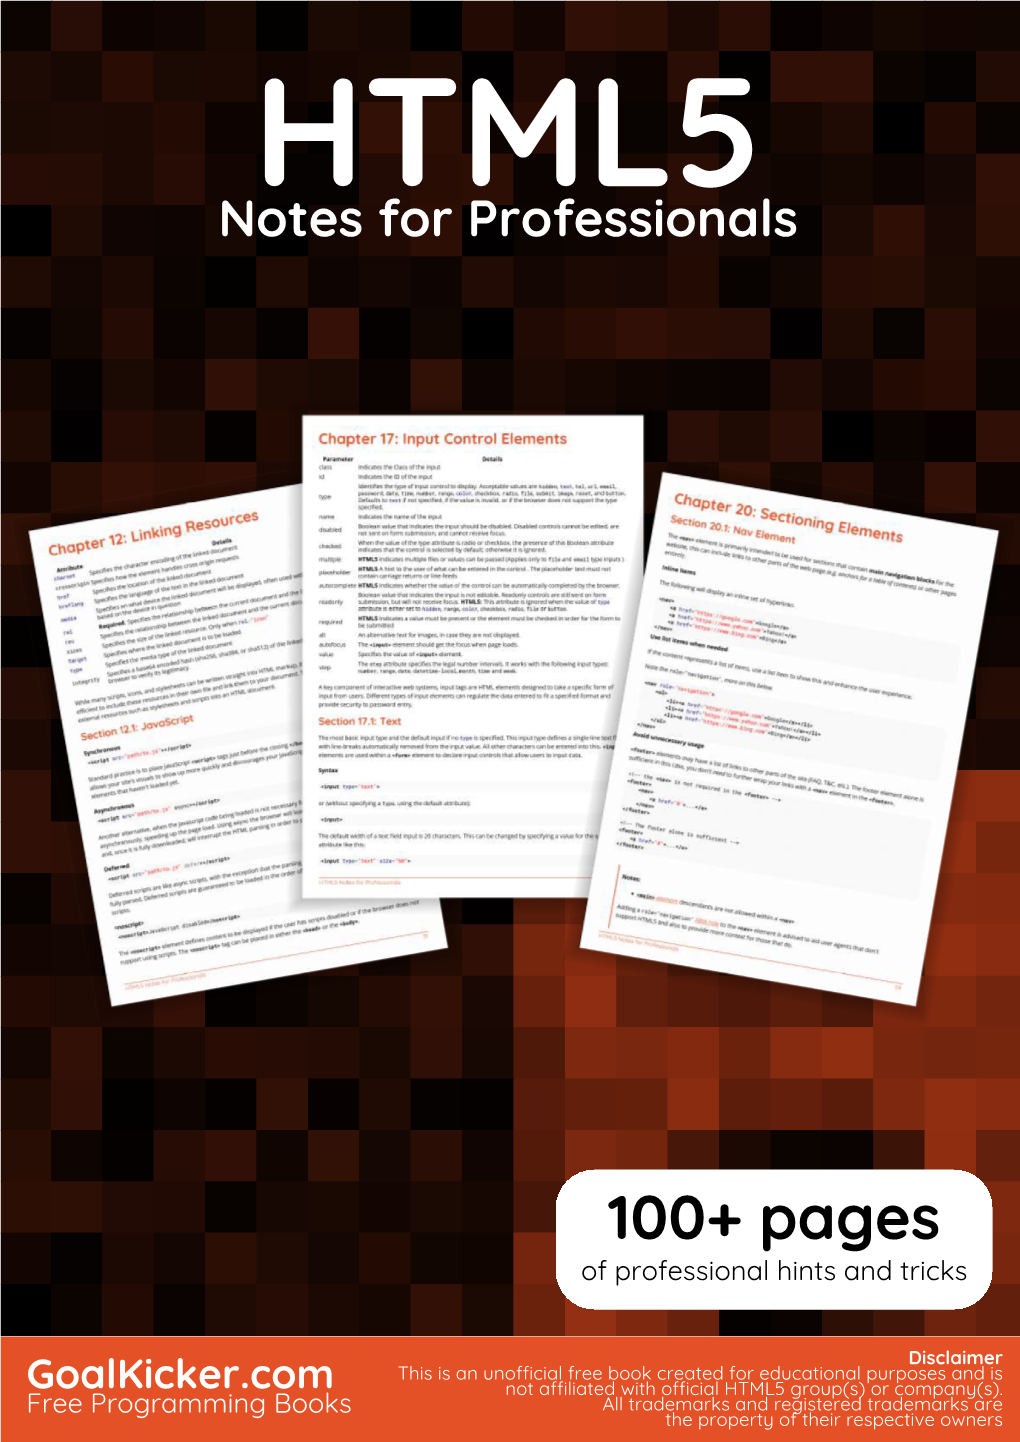 HTML5 Notes for Professionals Book Is Compiled from Stack Overﬂow Documentation, the Content Is Written by the Beautiful People at Stack Overﬂow